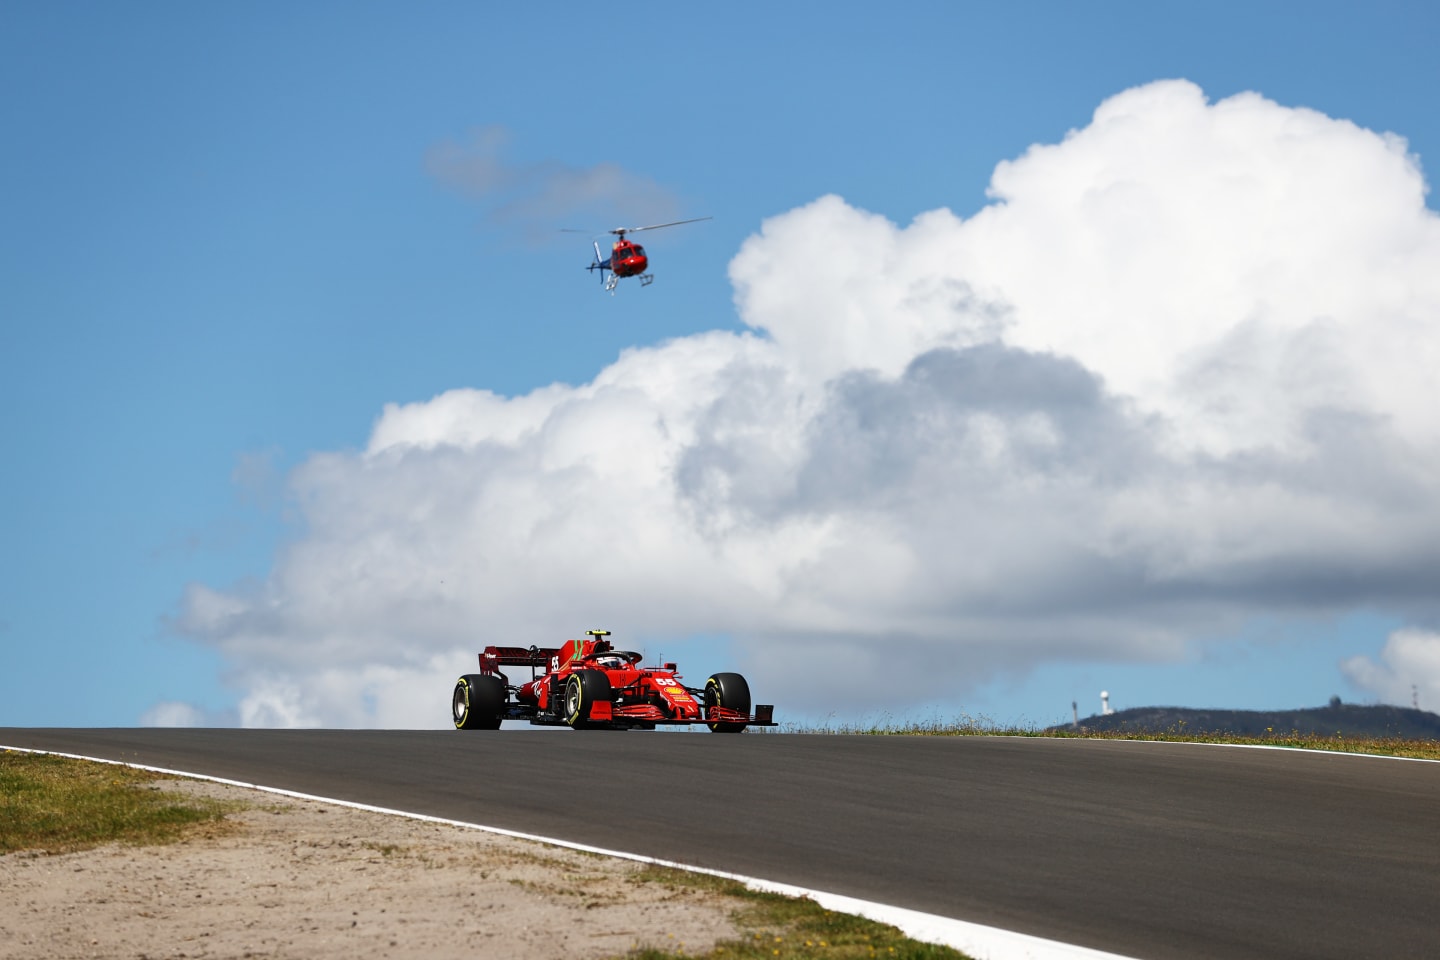 PORTIMAO, PORTUGAL - MAY 01: Carlos Sainz of Spain driving the (55) Scuderia Ferrari SF21 on track during qualifying for the F1 Grand Prix of Portugal at Autodromo Internacional Do Algarve on May 01, 2021 in Portimao, Portugal. (Photo by Bryn Lennon/Getty Images)